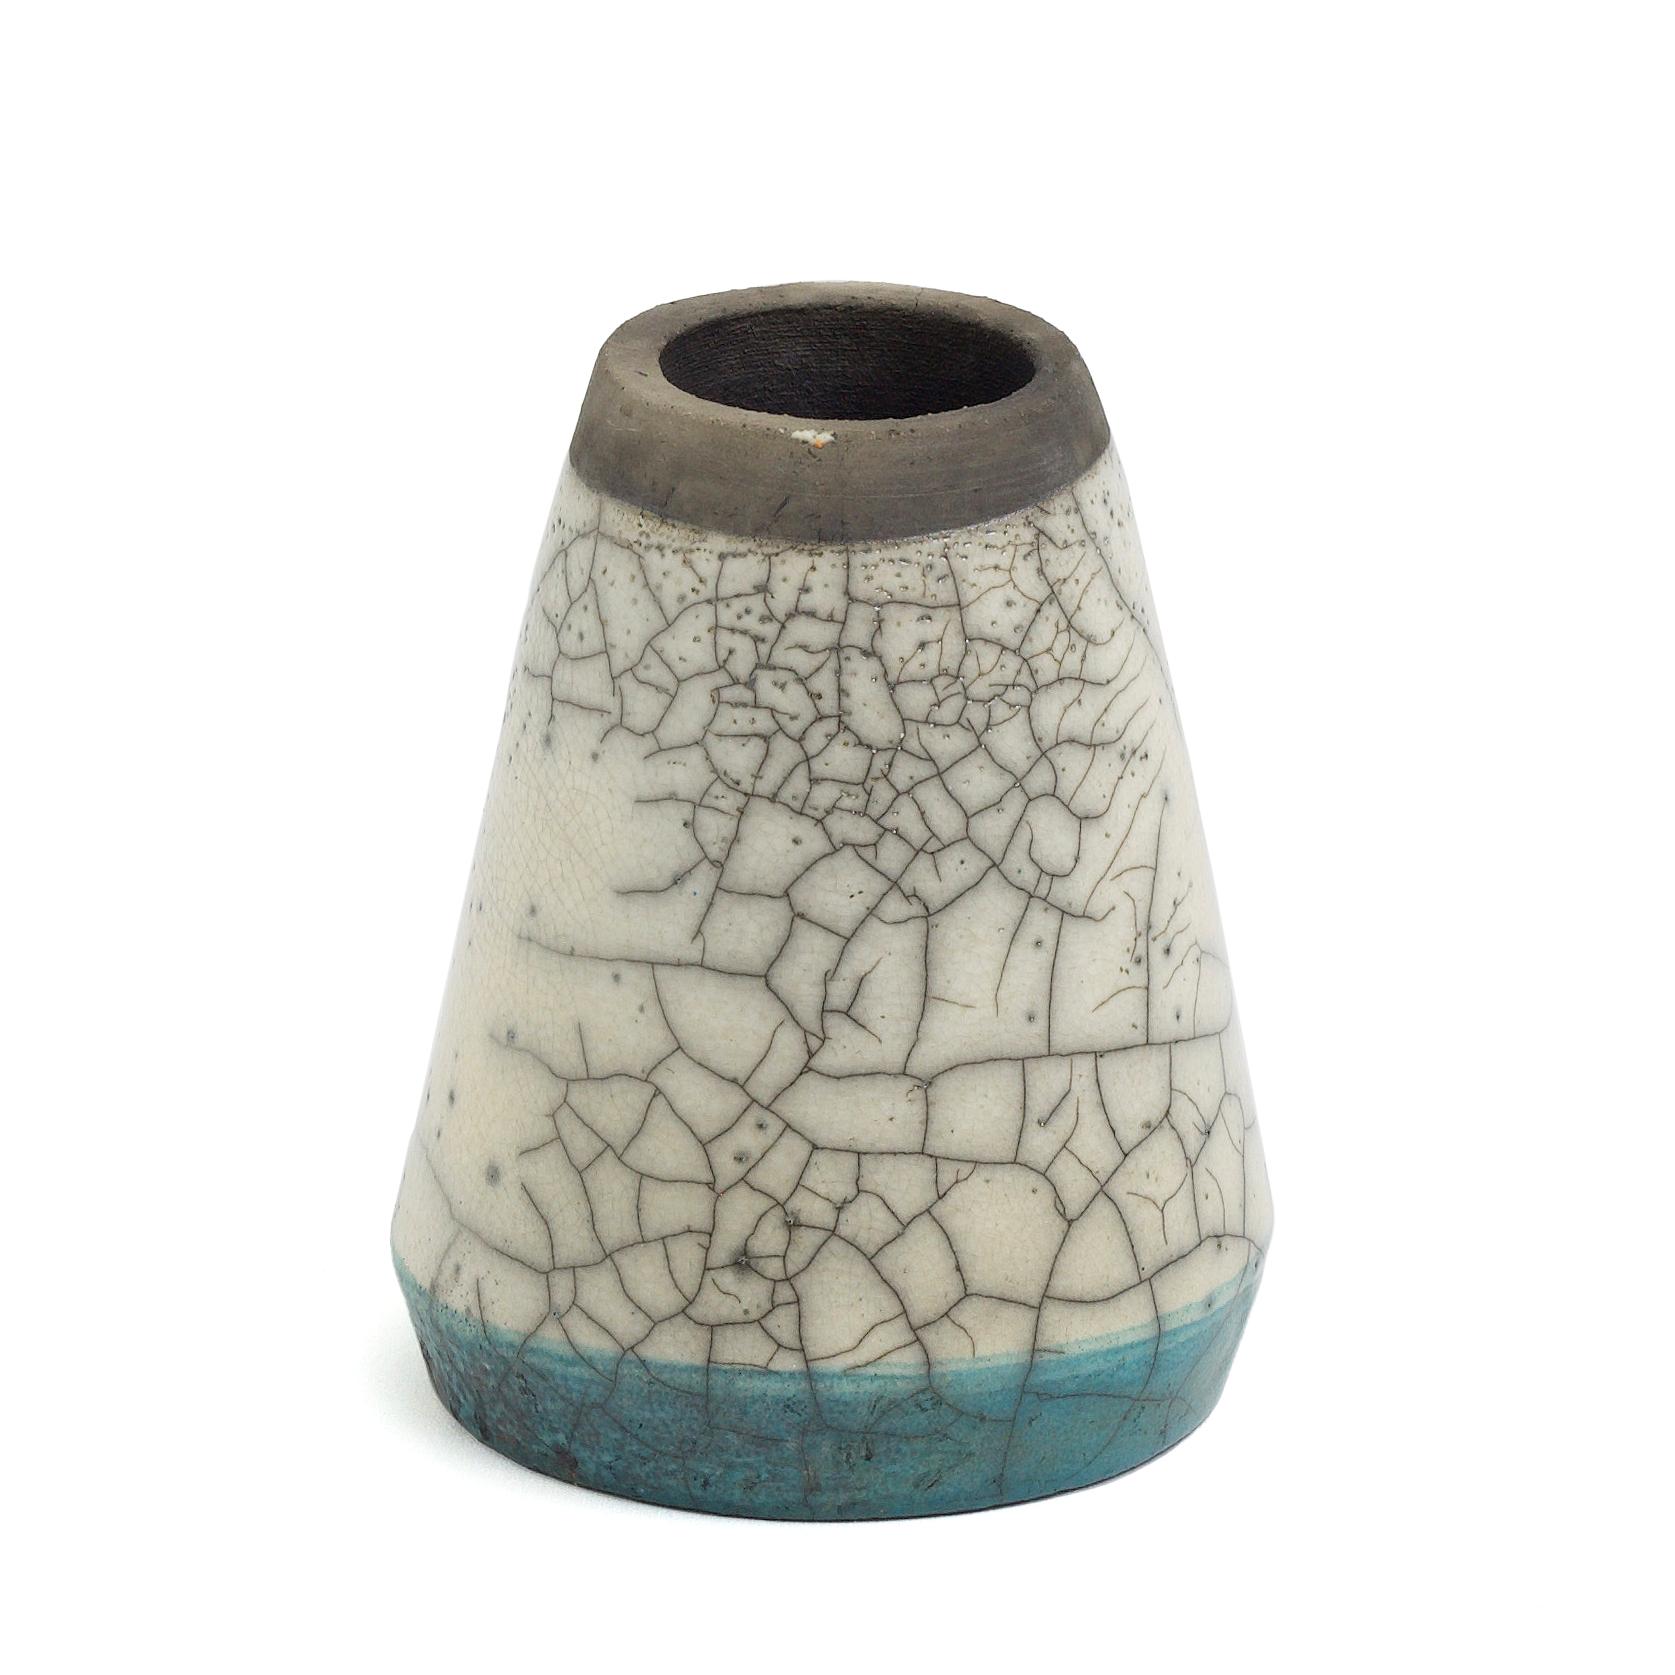 Kazan vase

Turquoise, crackle' and burnt colors overlapping and uncontainable in this vase that originates from the idea of the heat source used by ancient middle east potters. A geometrical shape that reminds of an ancient kiln used by the